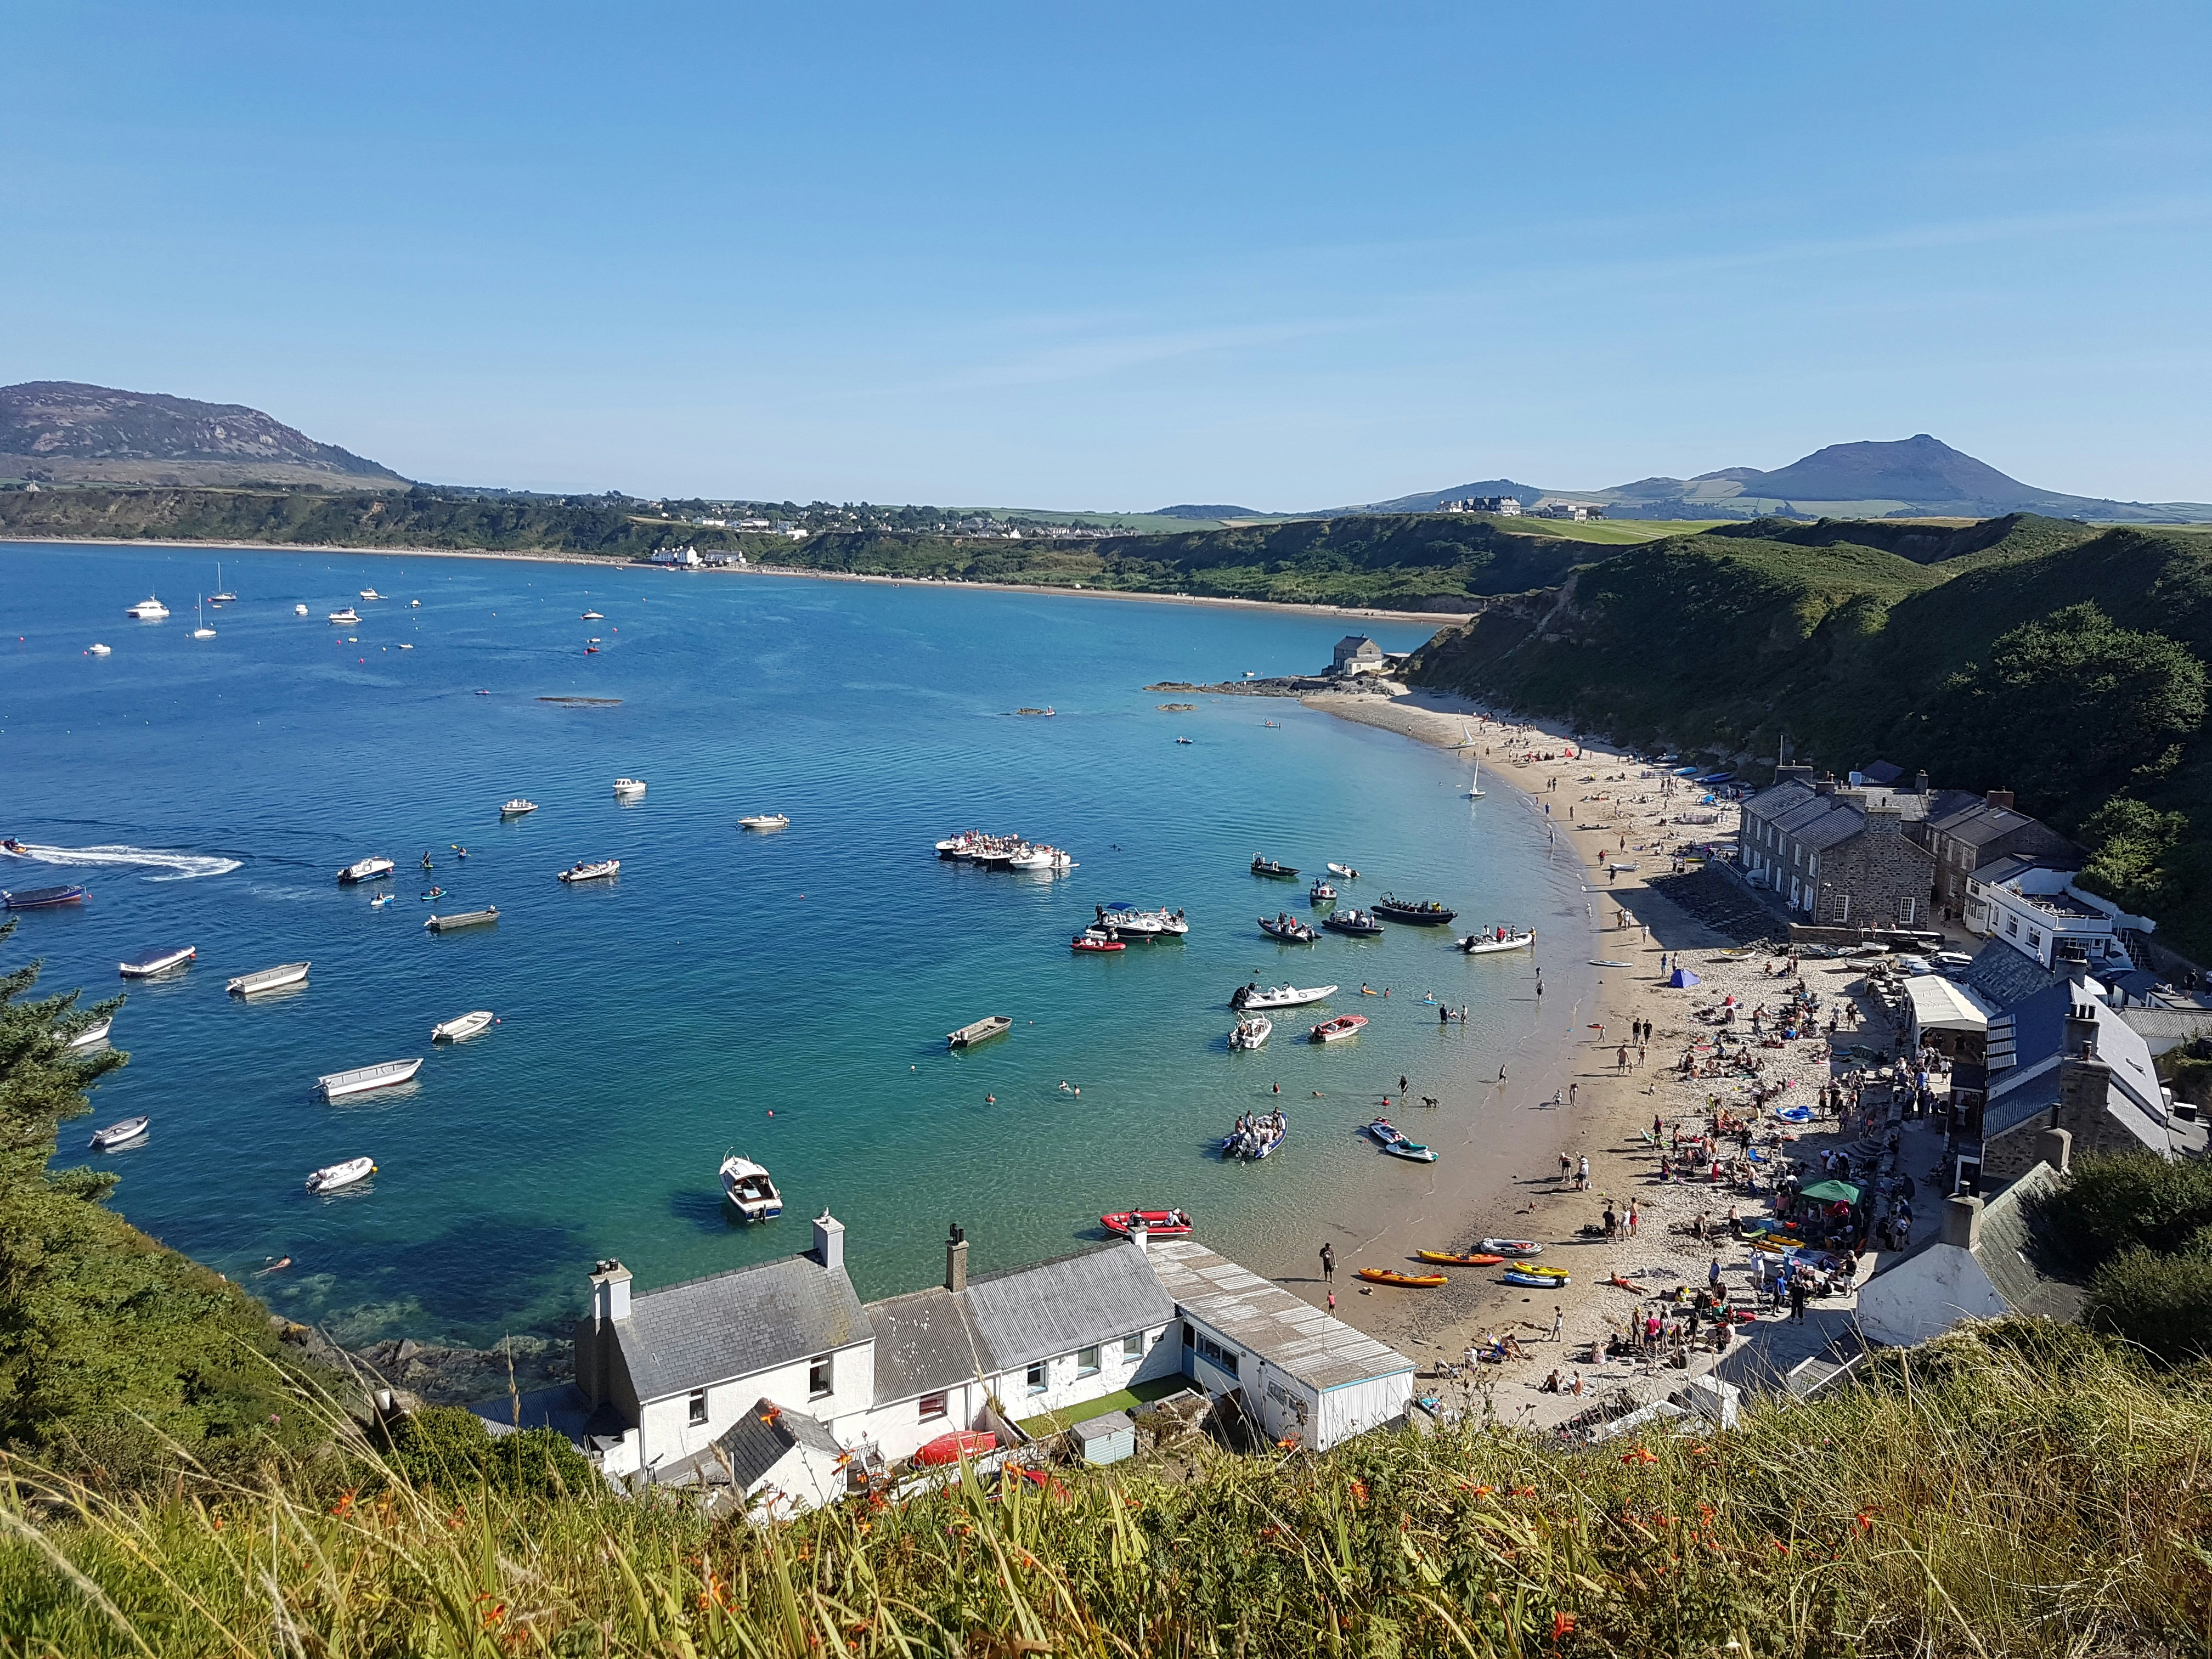 A view looking down to the boat-dotted bay at the busy Morfa Nefyn beach. Buildings line the beach-front, and many people are milling around on the sand outside Tŷ Coch Inn.